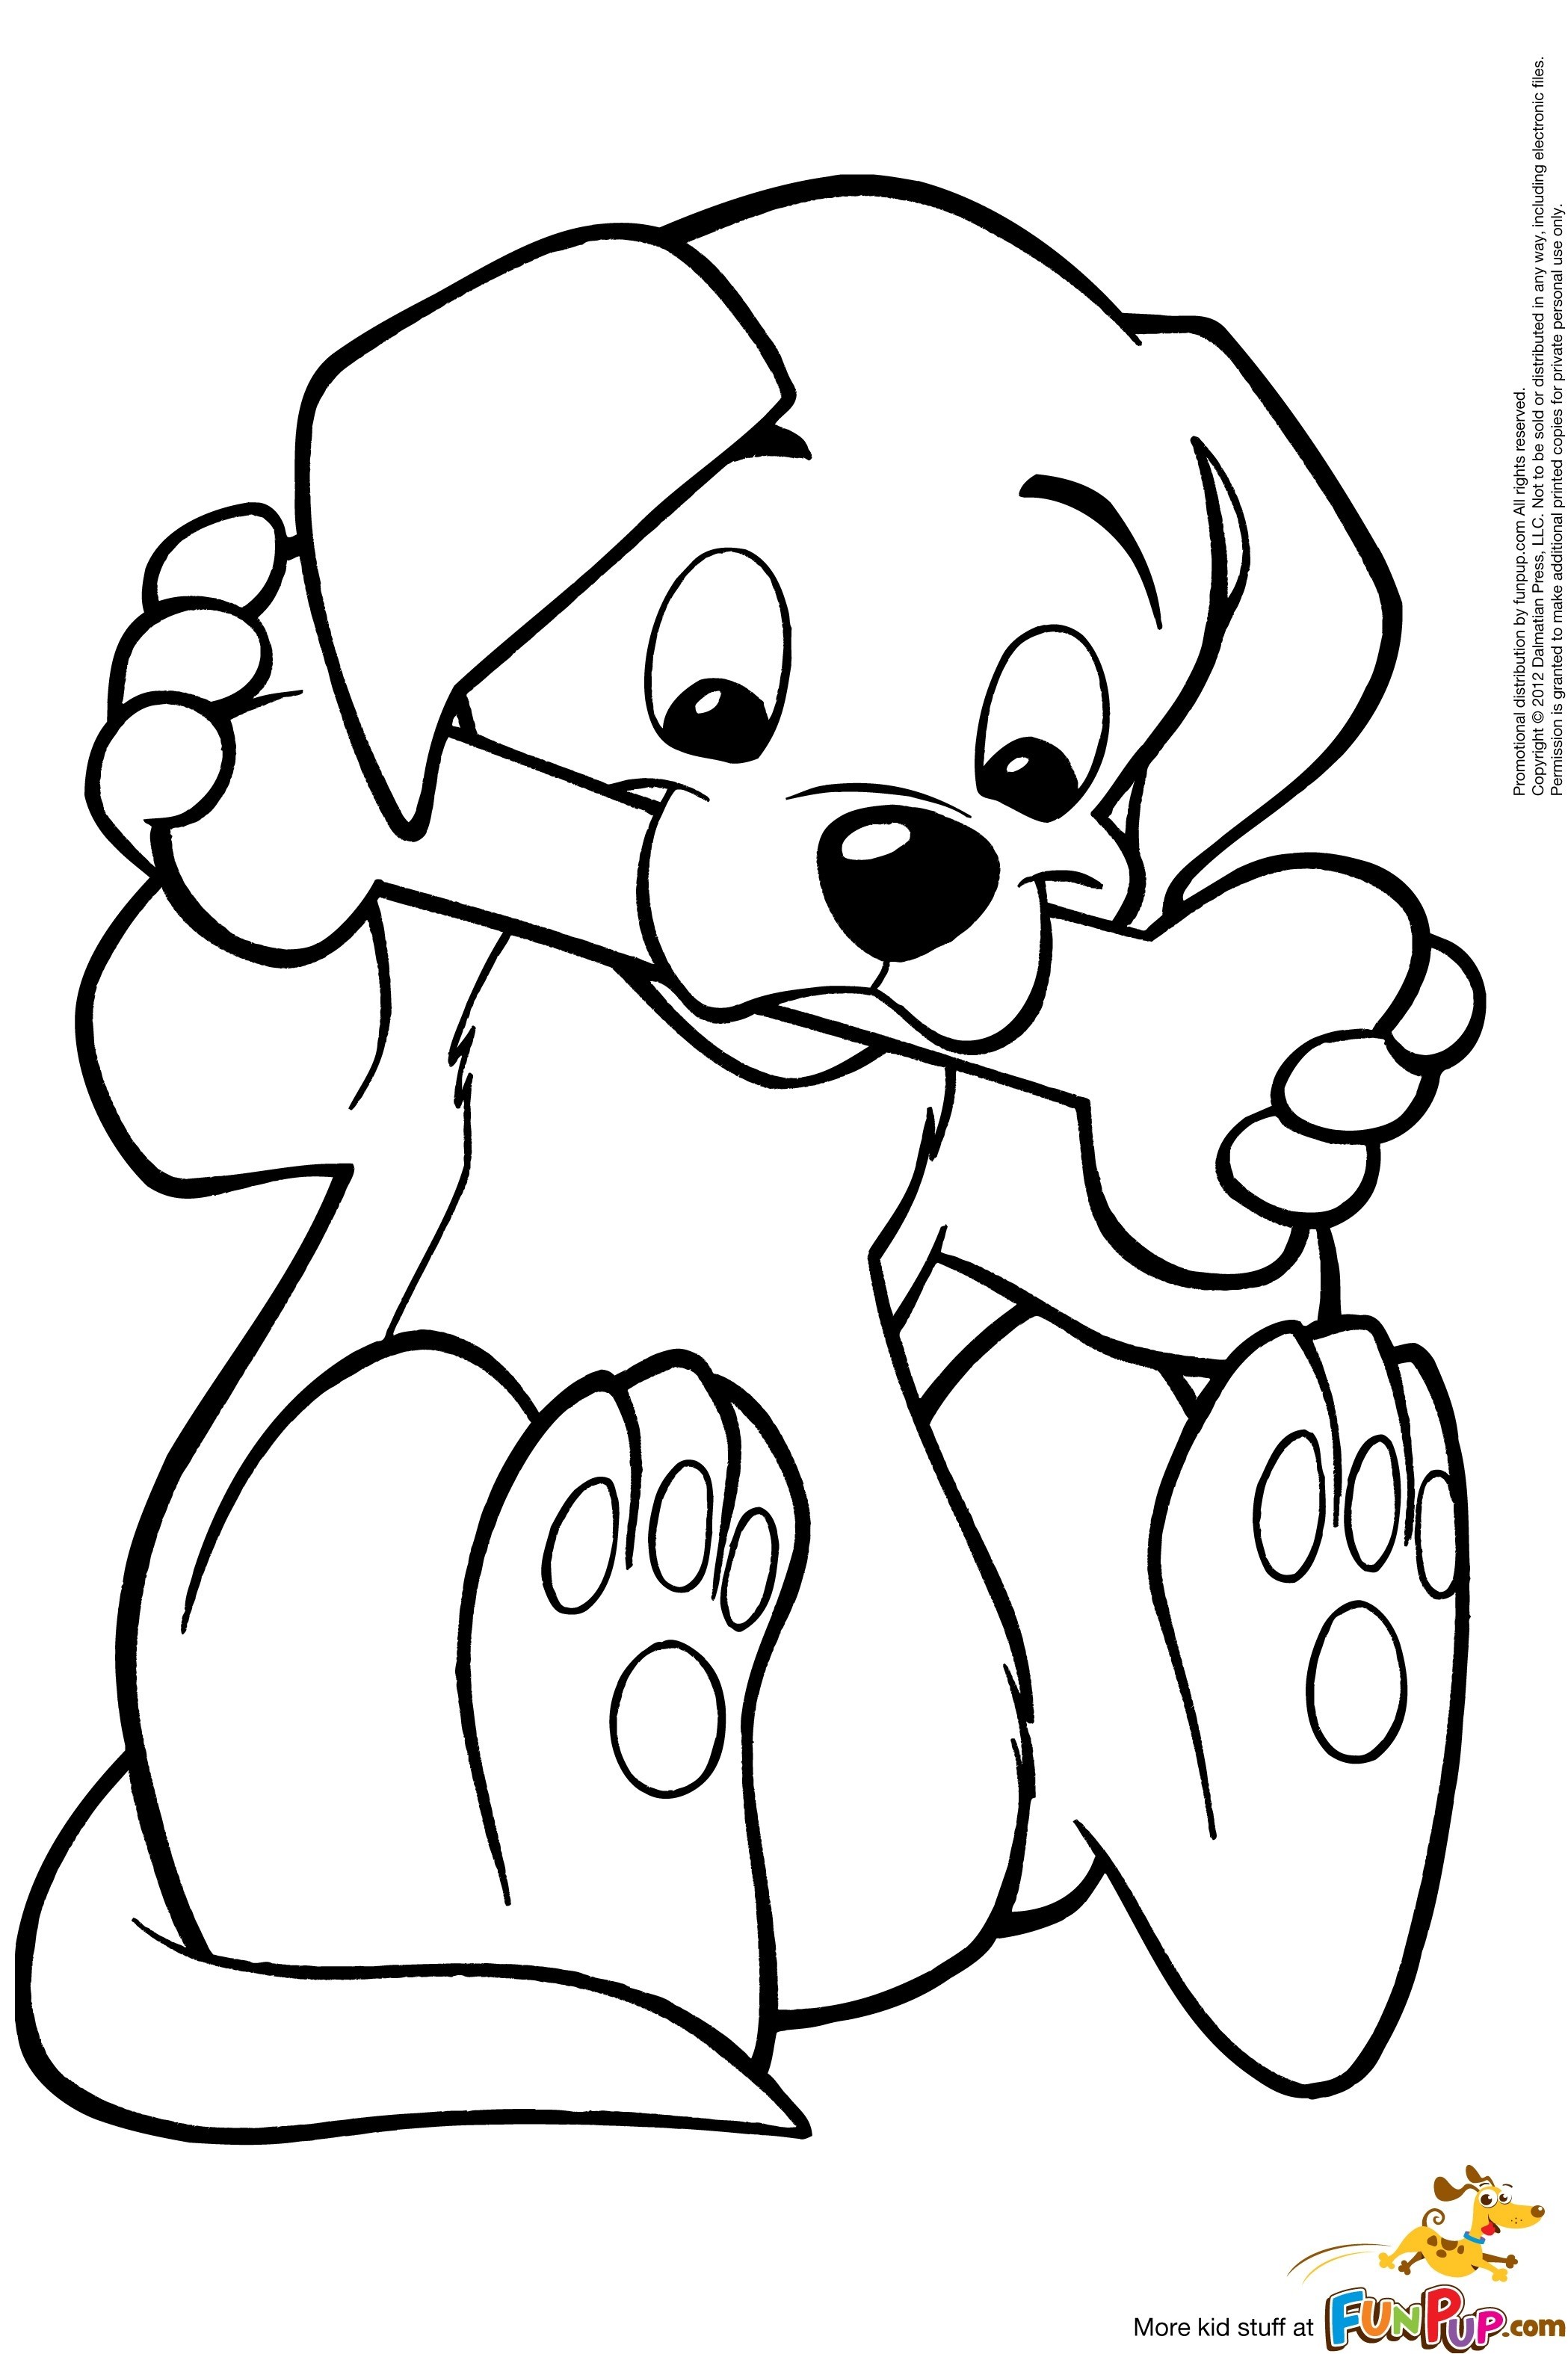 dog coloring pages to print out best coloring page dog march 2013 print coloring dog to pages out 